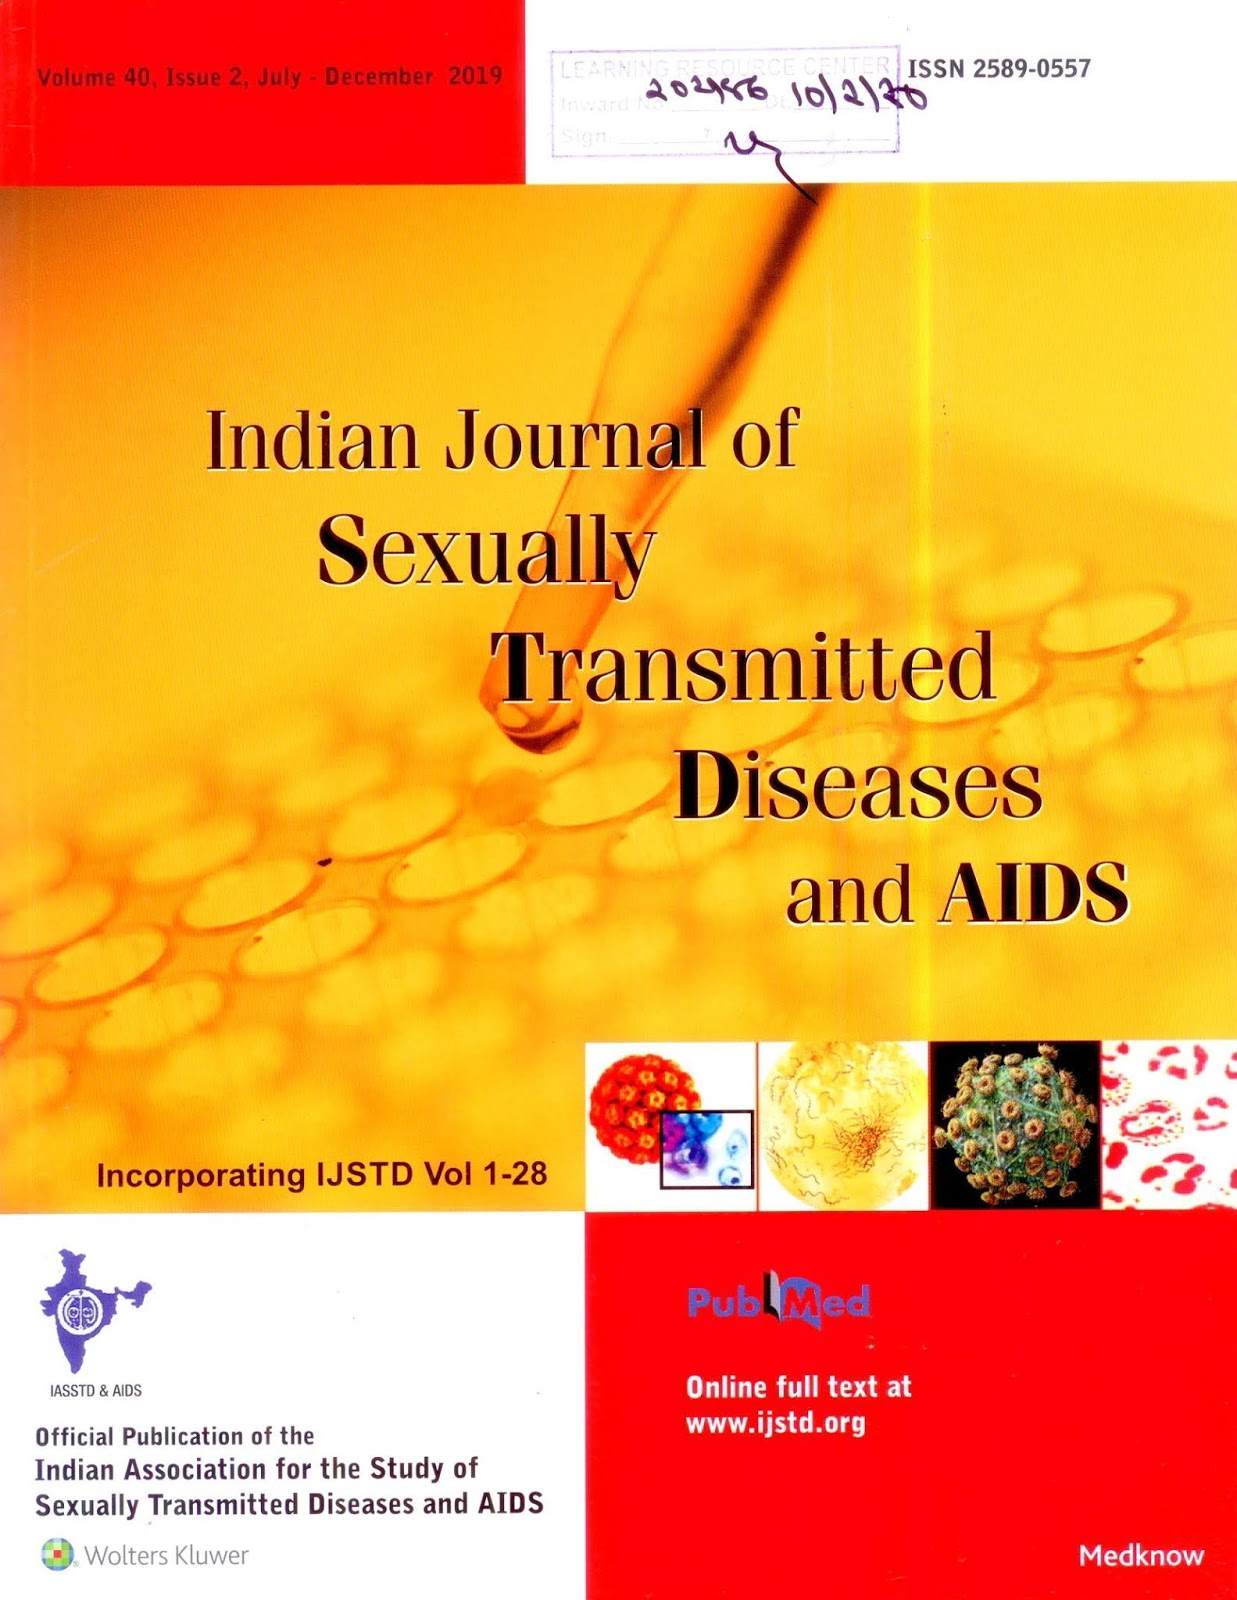 http://www.ijstd.org/showBackIssue.asp?issn=2589-0557;year=2019;volume=40;issue=2;month=July-December